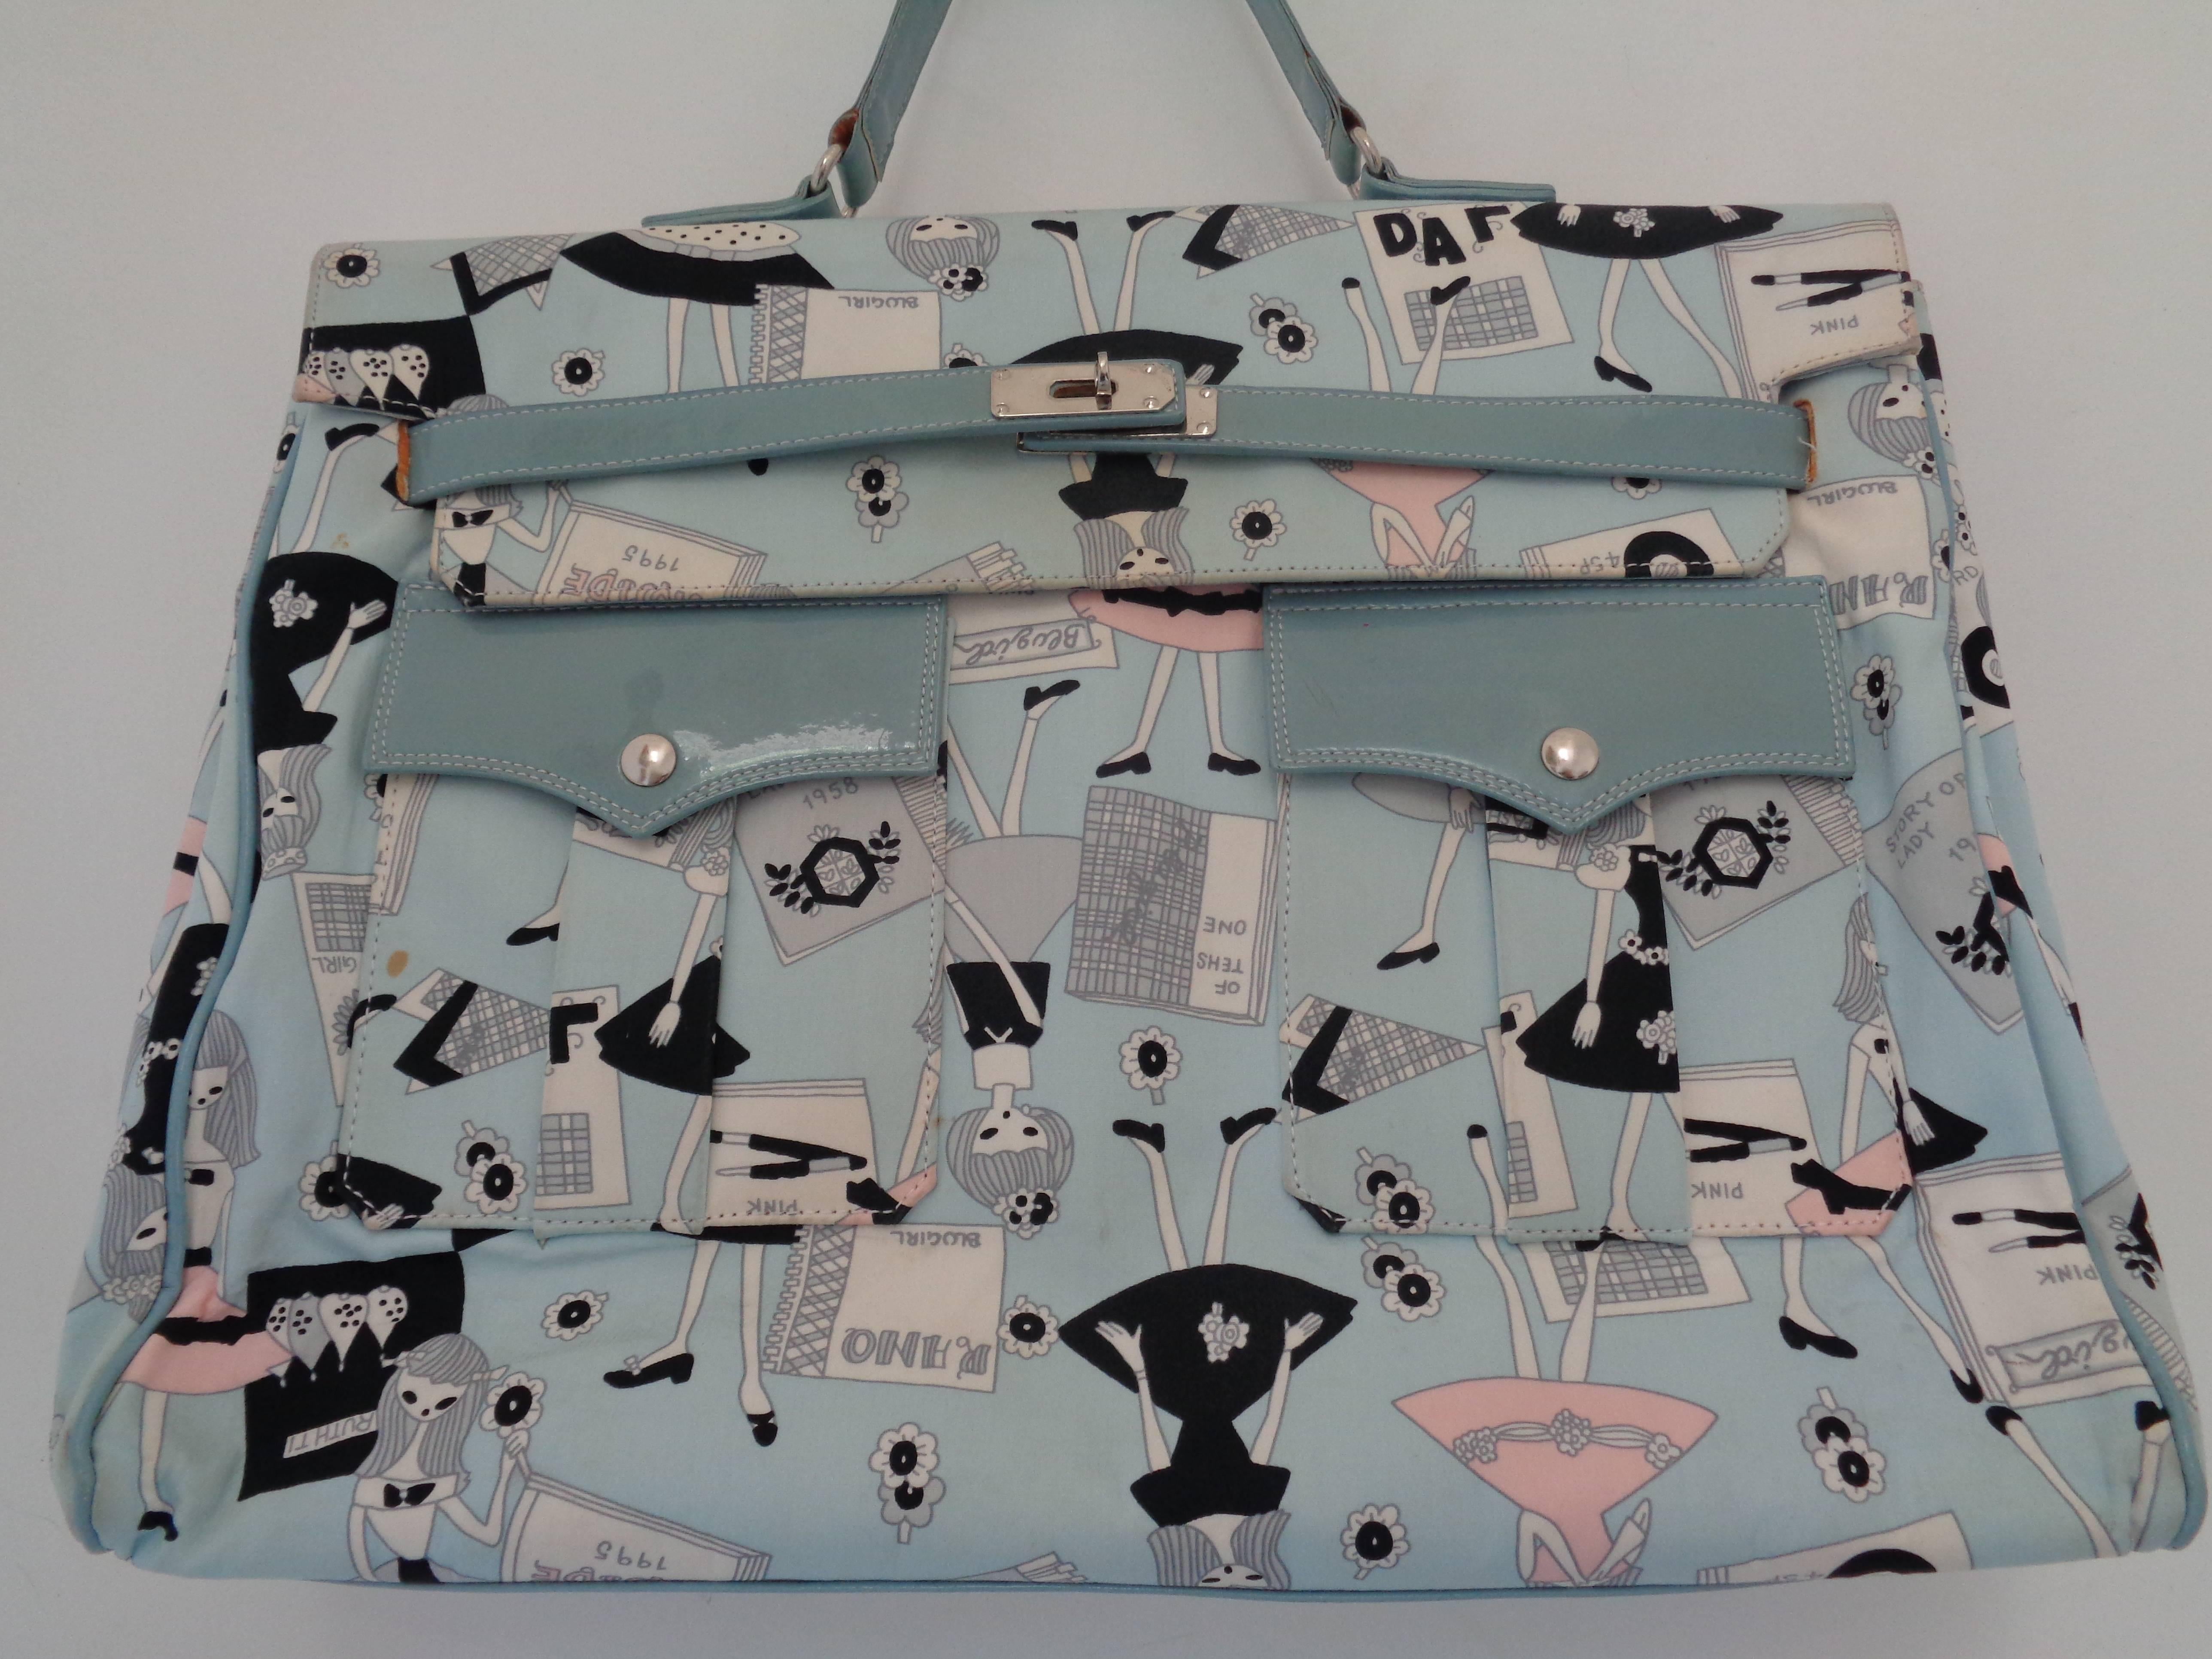 Blumarine Lightblu multicolour Bag

Multicoloured bag with girls print allover in prompt conditions.
Check carefully pics as some stains are present